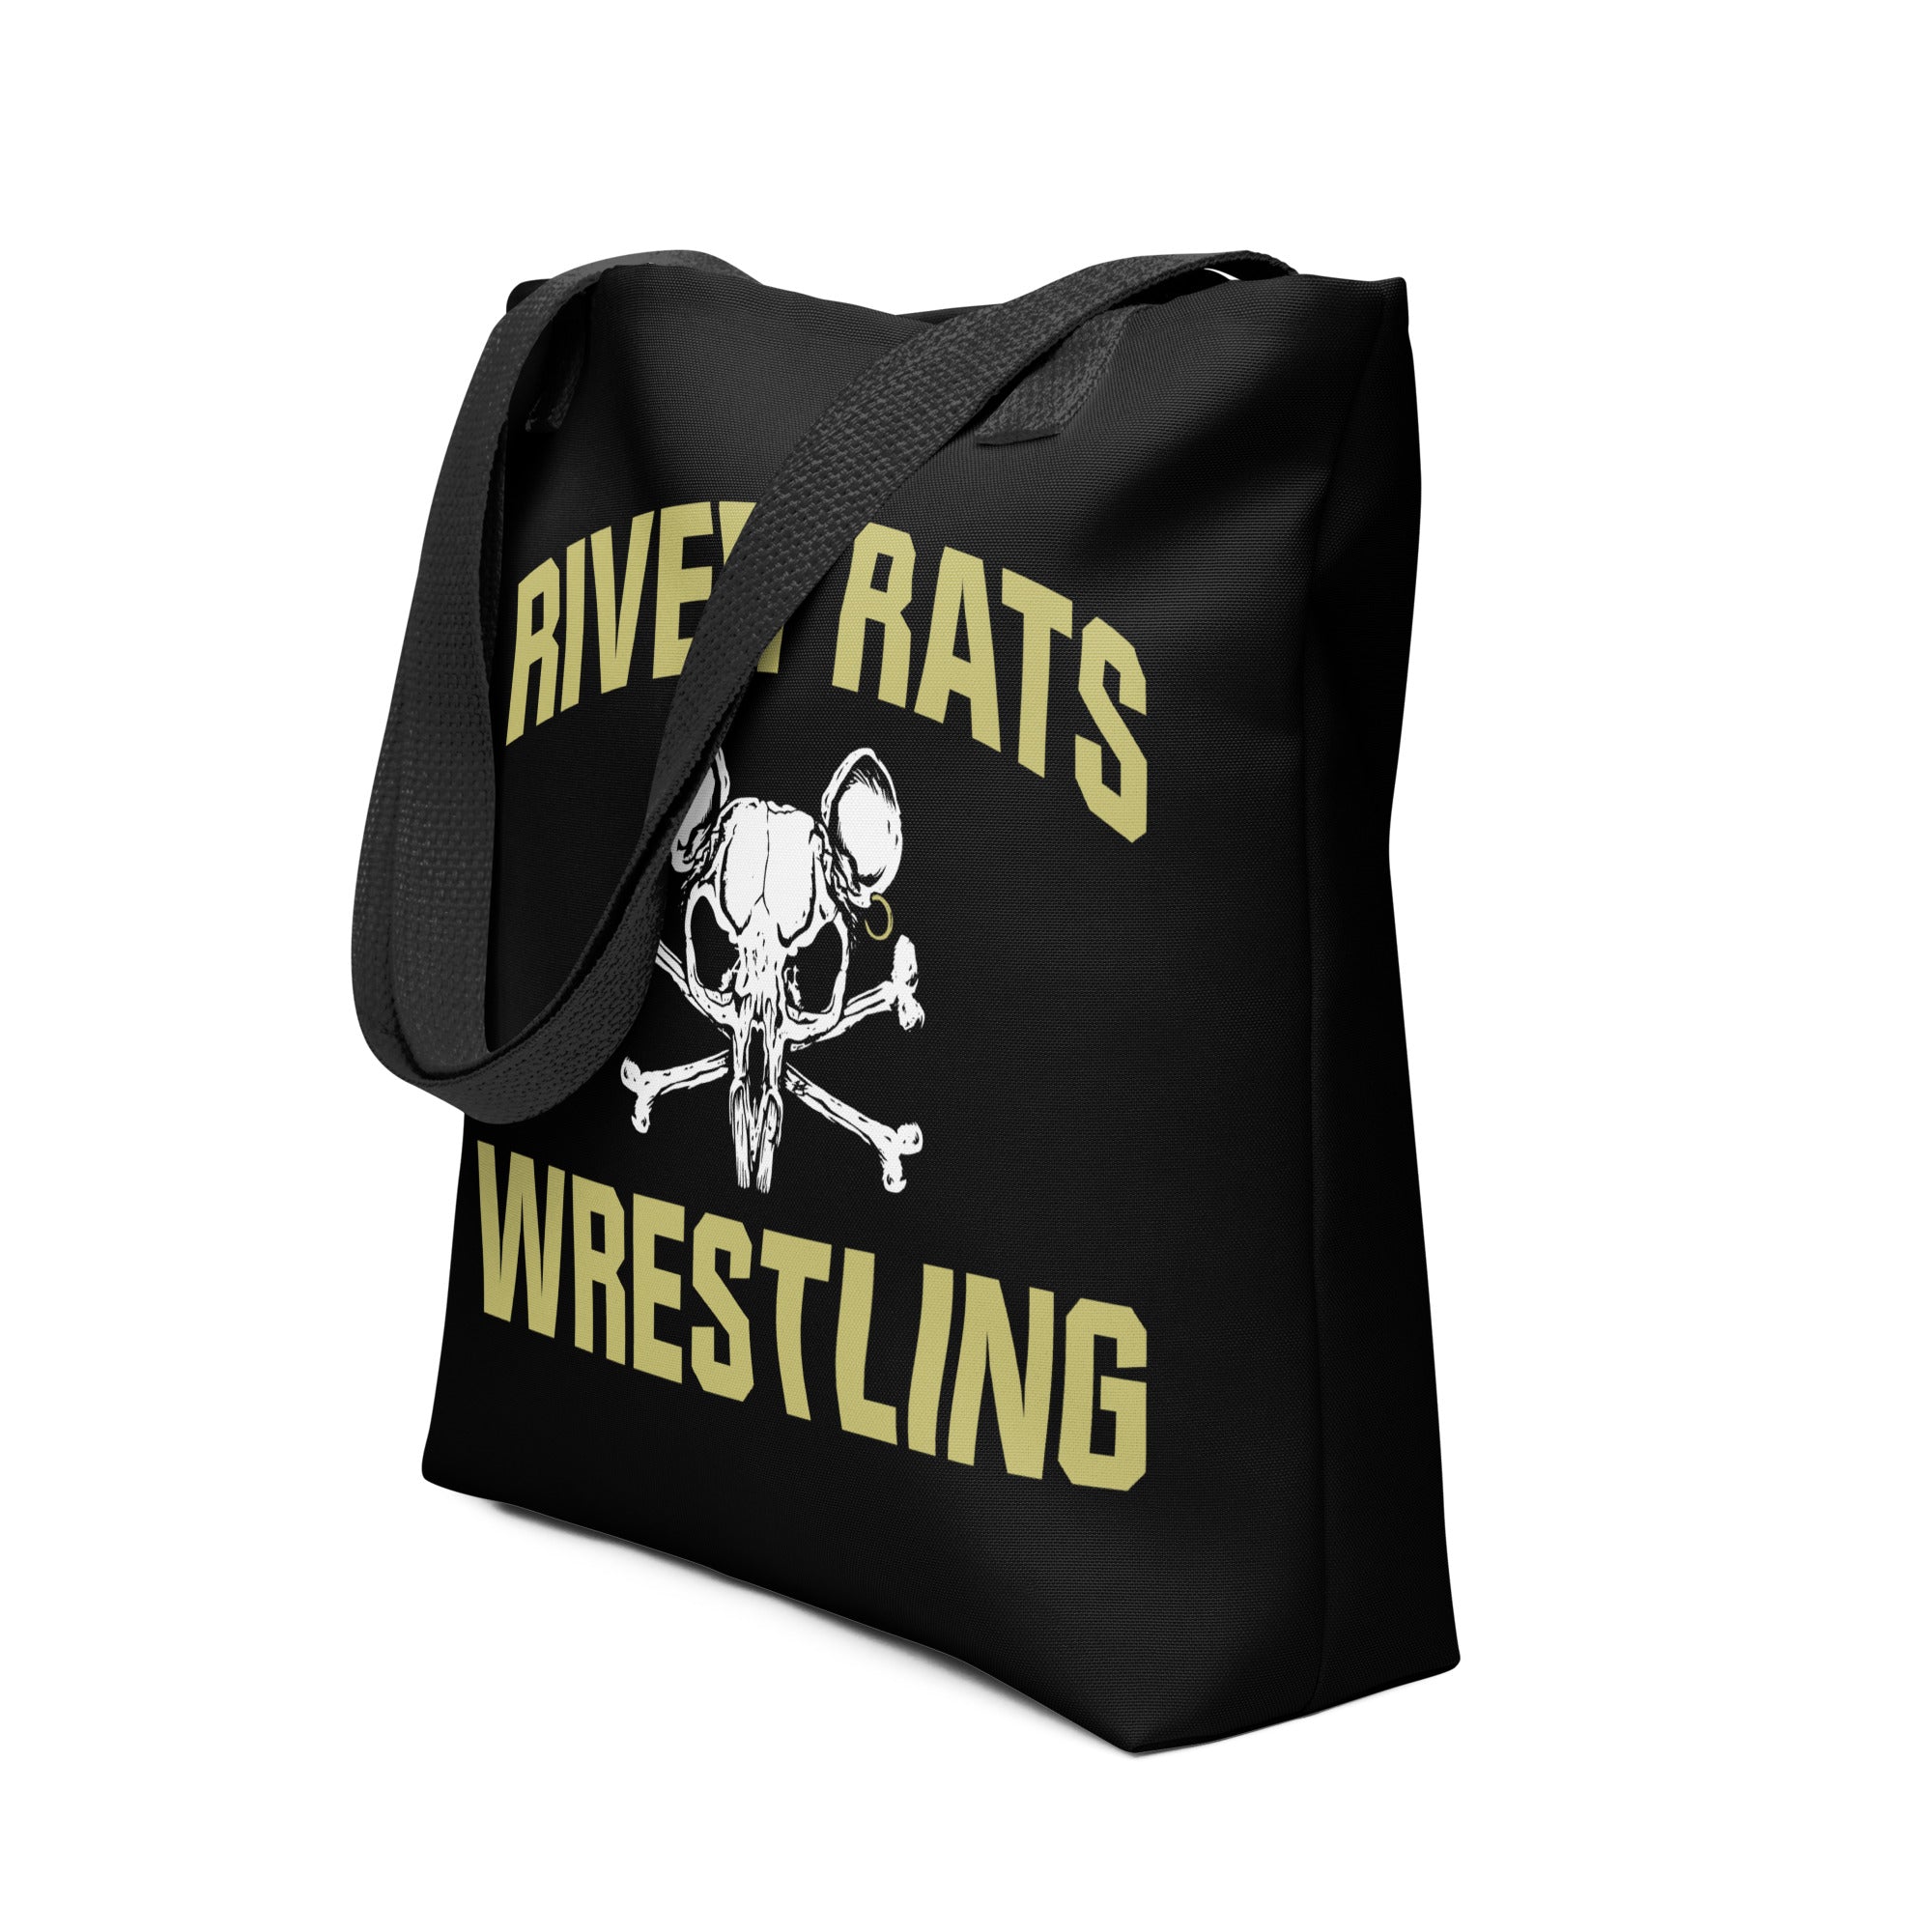 River Rats Wrestling All Over Print Tote